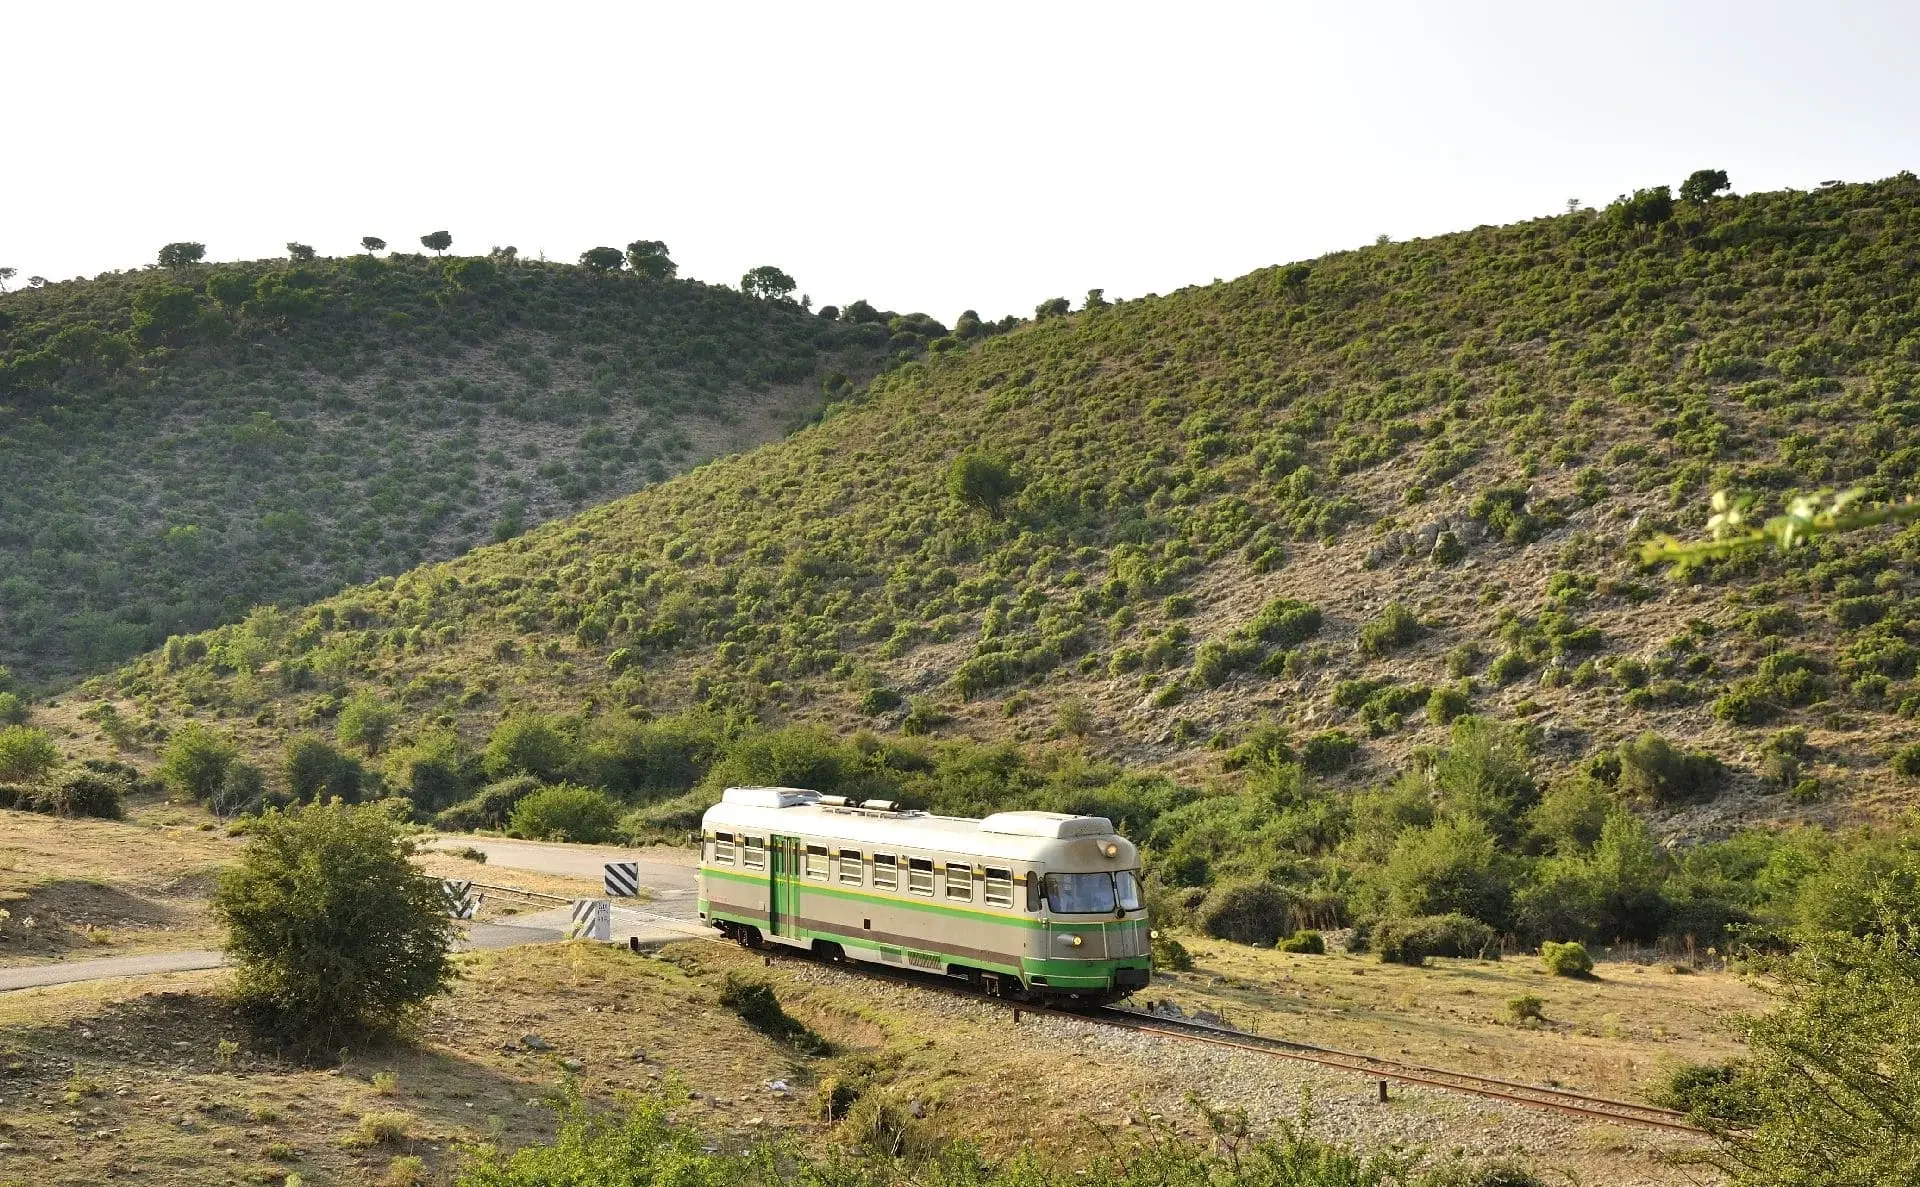 Little Green Train in Sardinia's Lush Woods: Enchanting Rail Journey amidst Nature's Beauty.